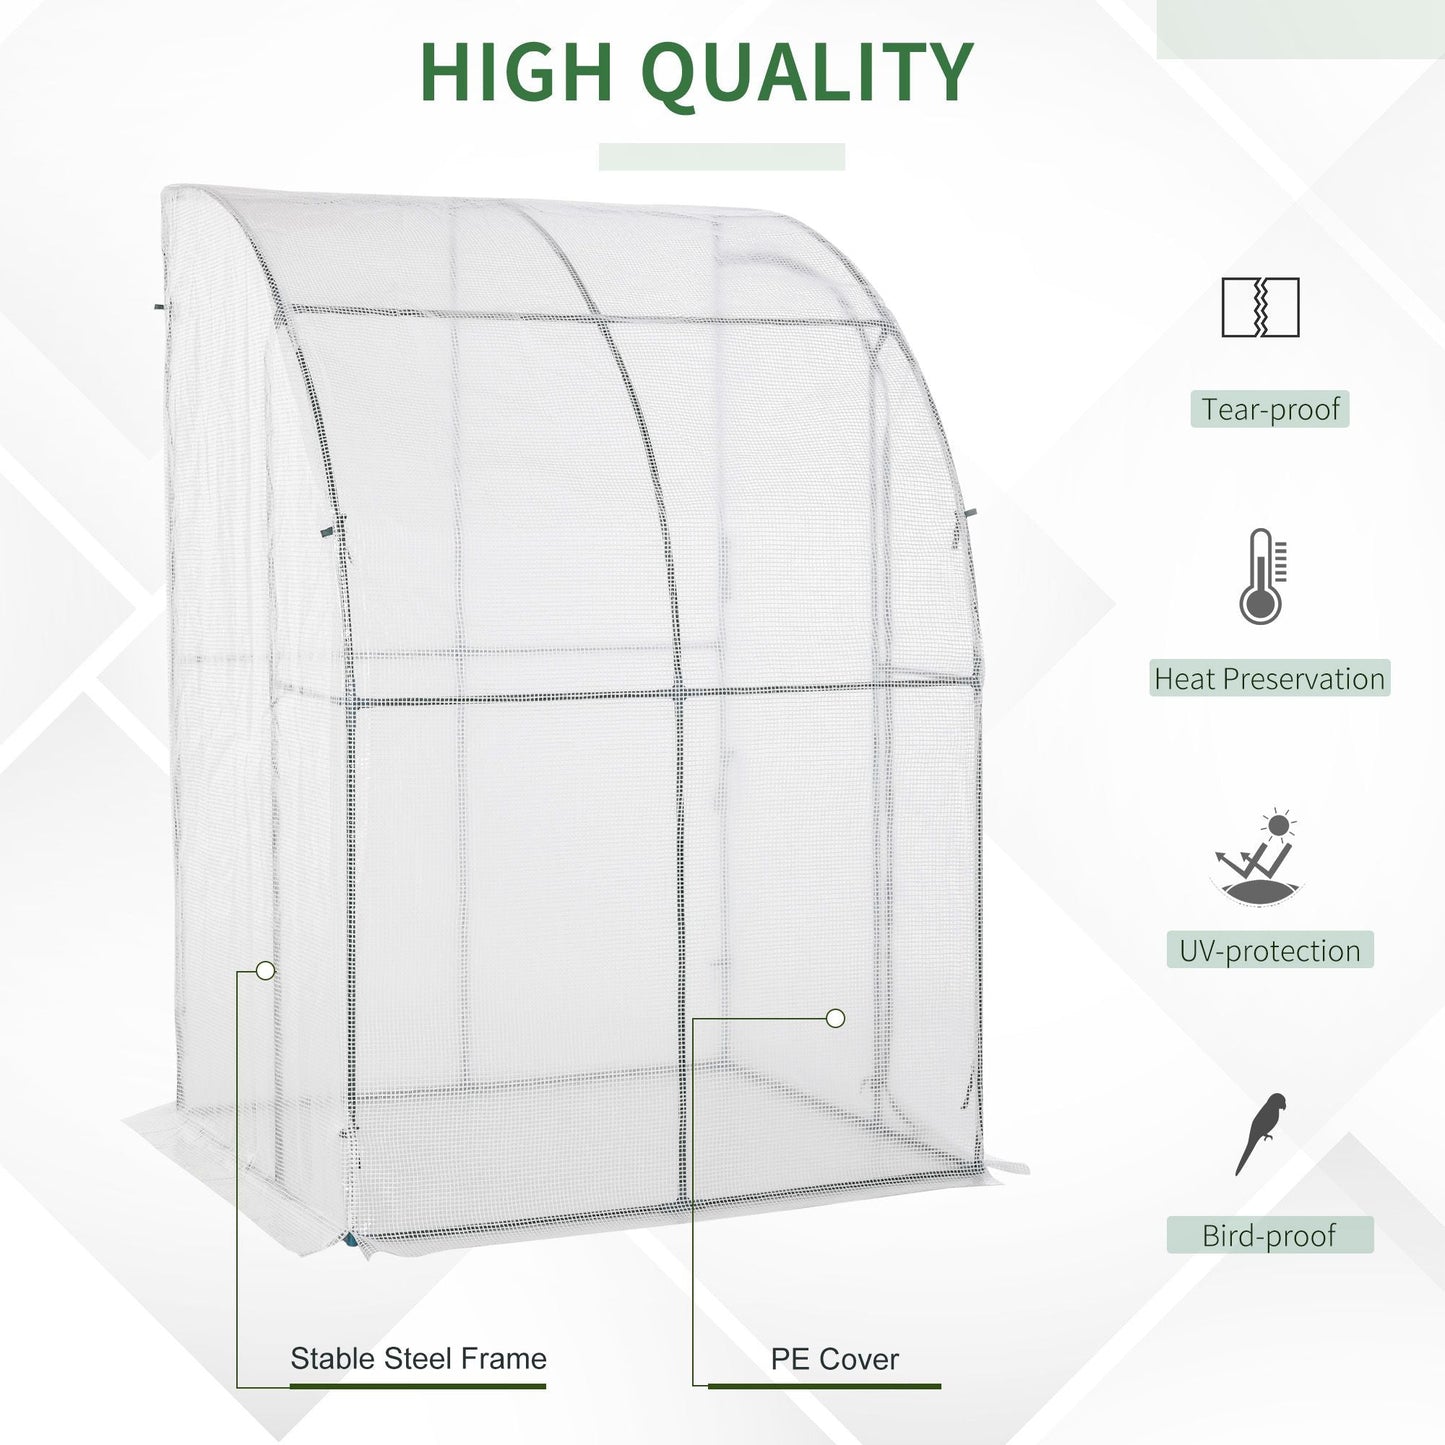 Outsunny Lean-To Greenhouse: Walk-In PE Cover with Zippered Door, 143Lx118Wx212H cm, White Outdoor Growing Space